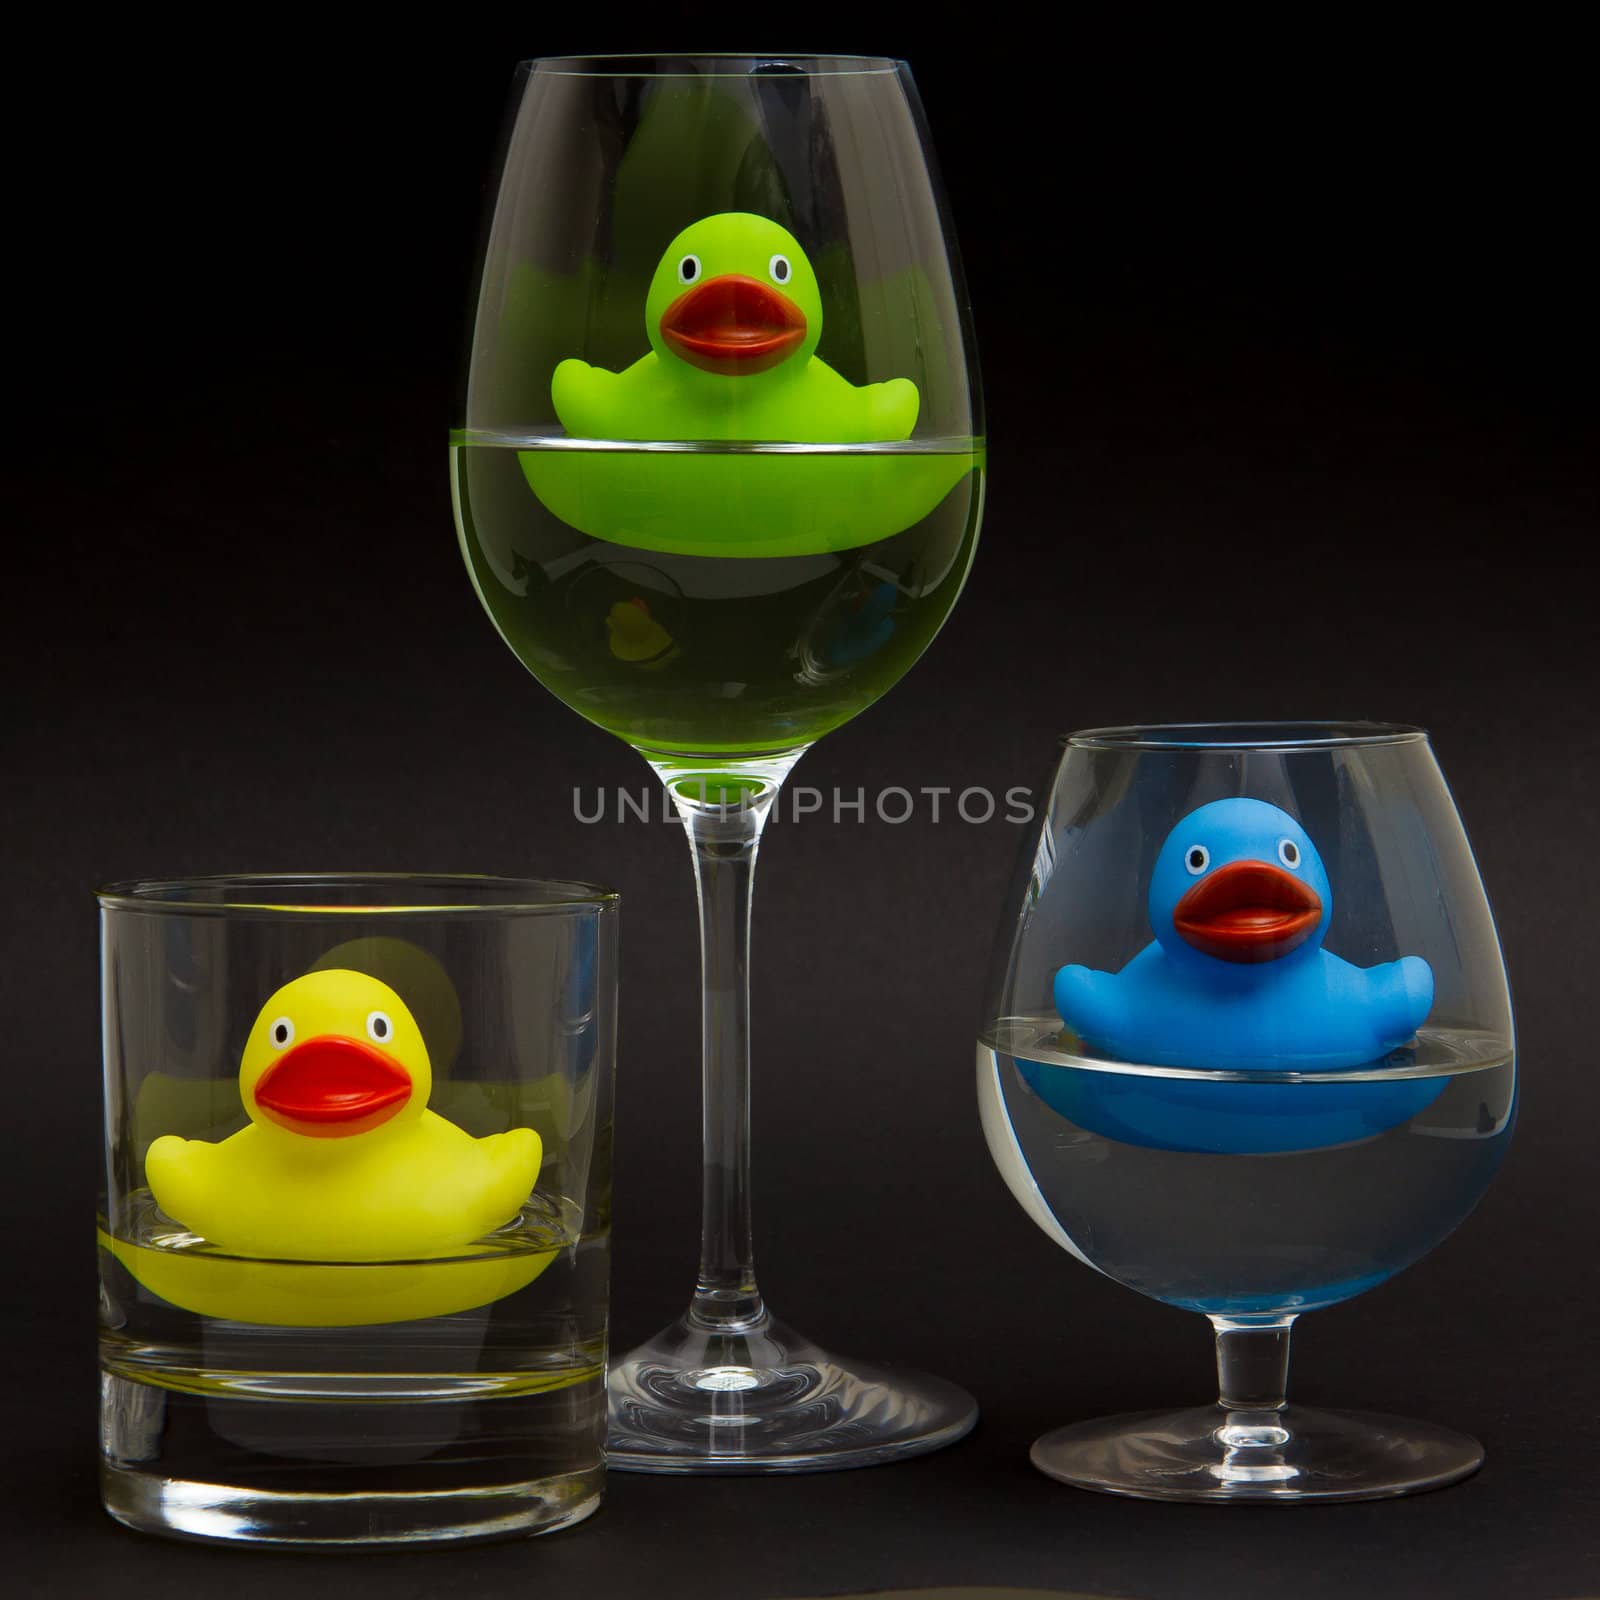 Green, yellow and blue rubber duck in different glasses by michaklootwijk